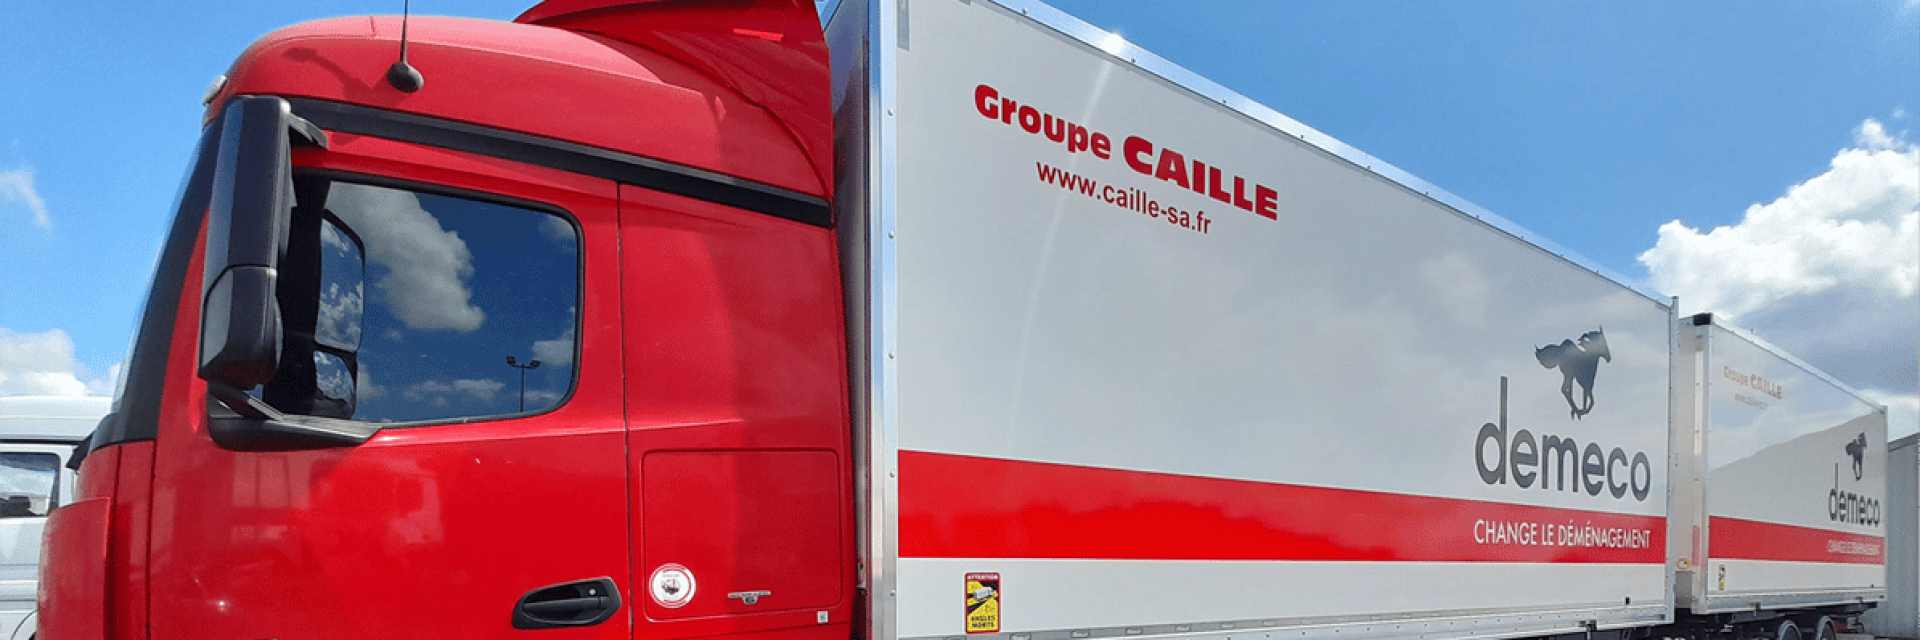 camion caille